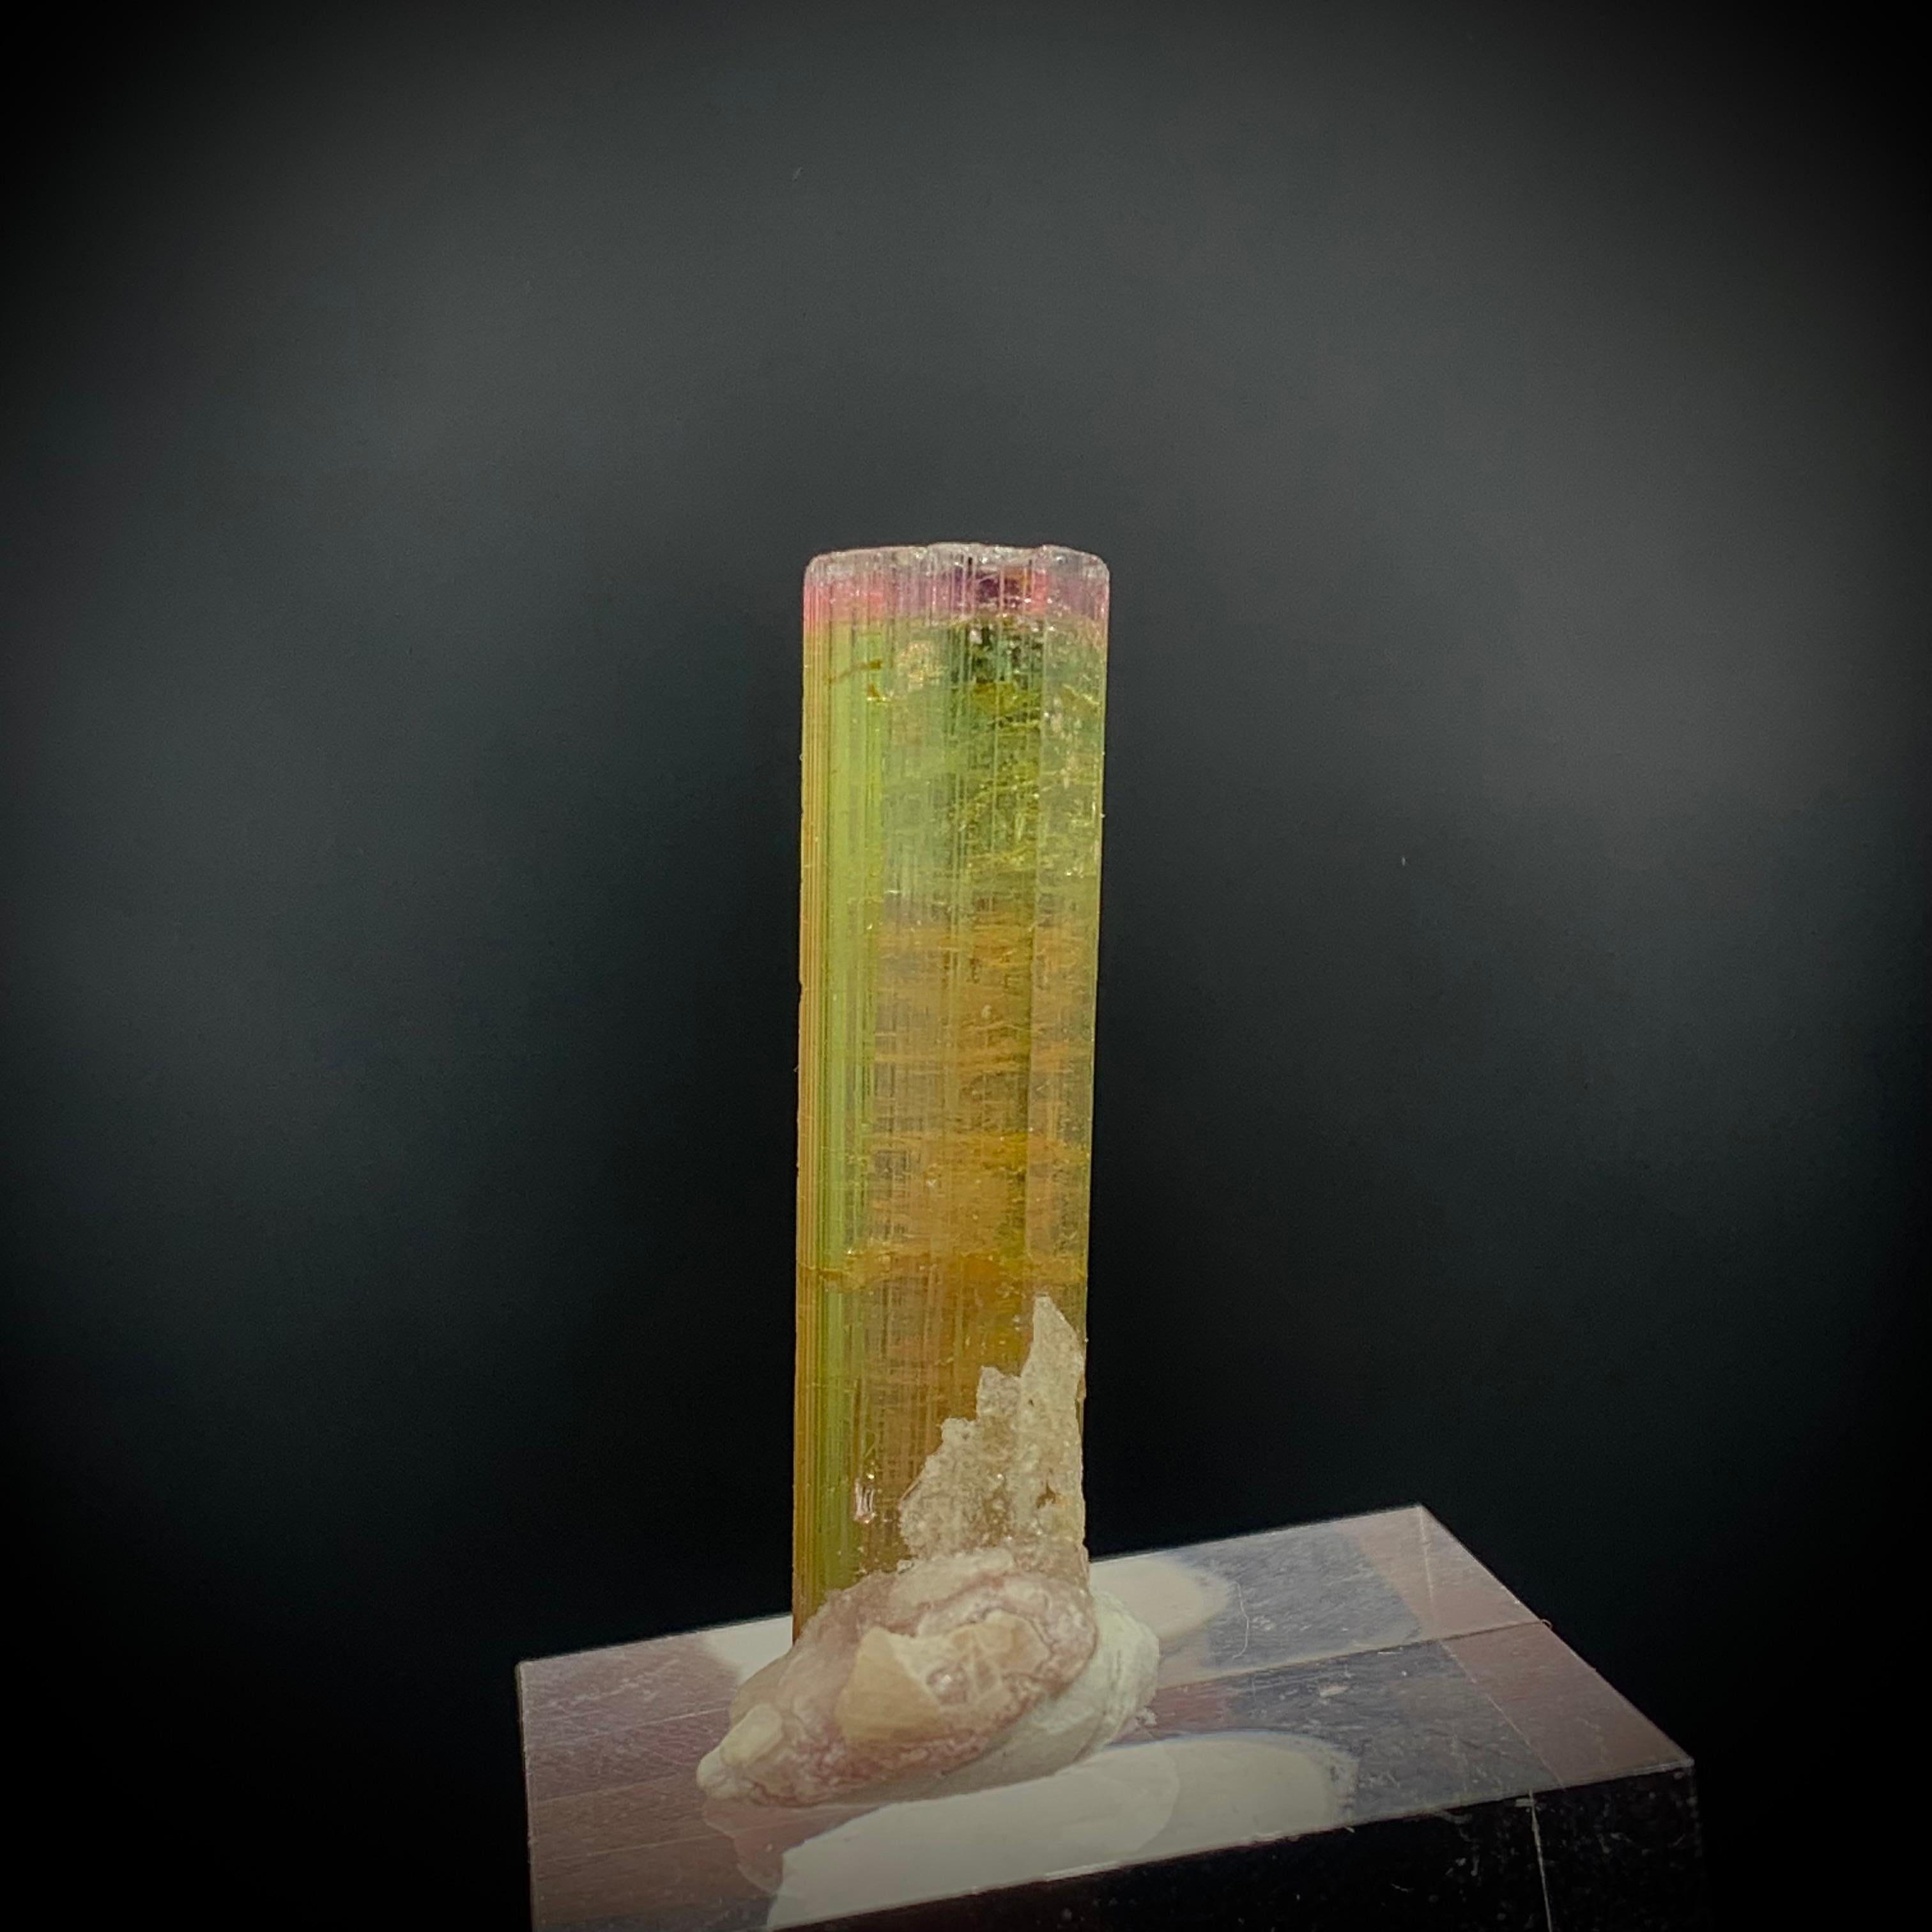 Gorgeous Natural Tri Color Tourmaline Specimen with Mica 
WEIGHT: 5.25 grams
DIMENSIONS : 3.4 x 1.2 x 10 Cm
ORIGIN: Afghanistan
TREATMENT: None
Tourmaline is an extremely popular gemstone; the name Tourmaline is derived from Turamali, which is